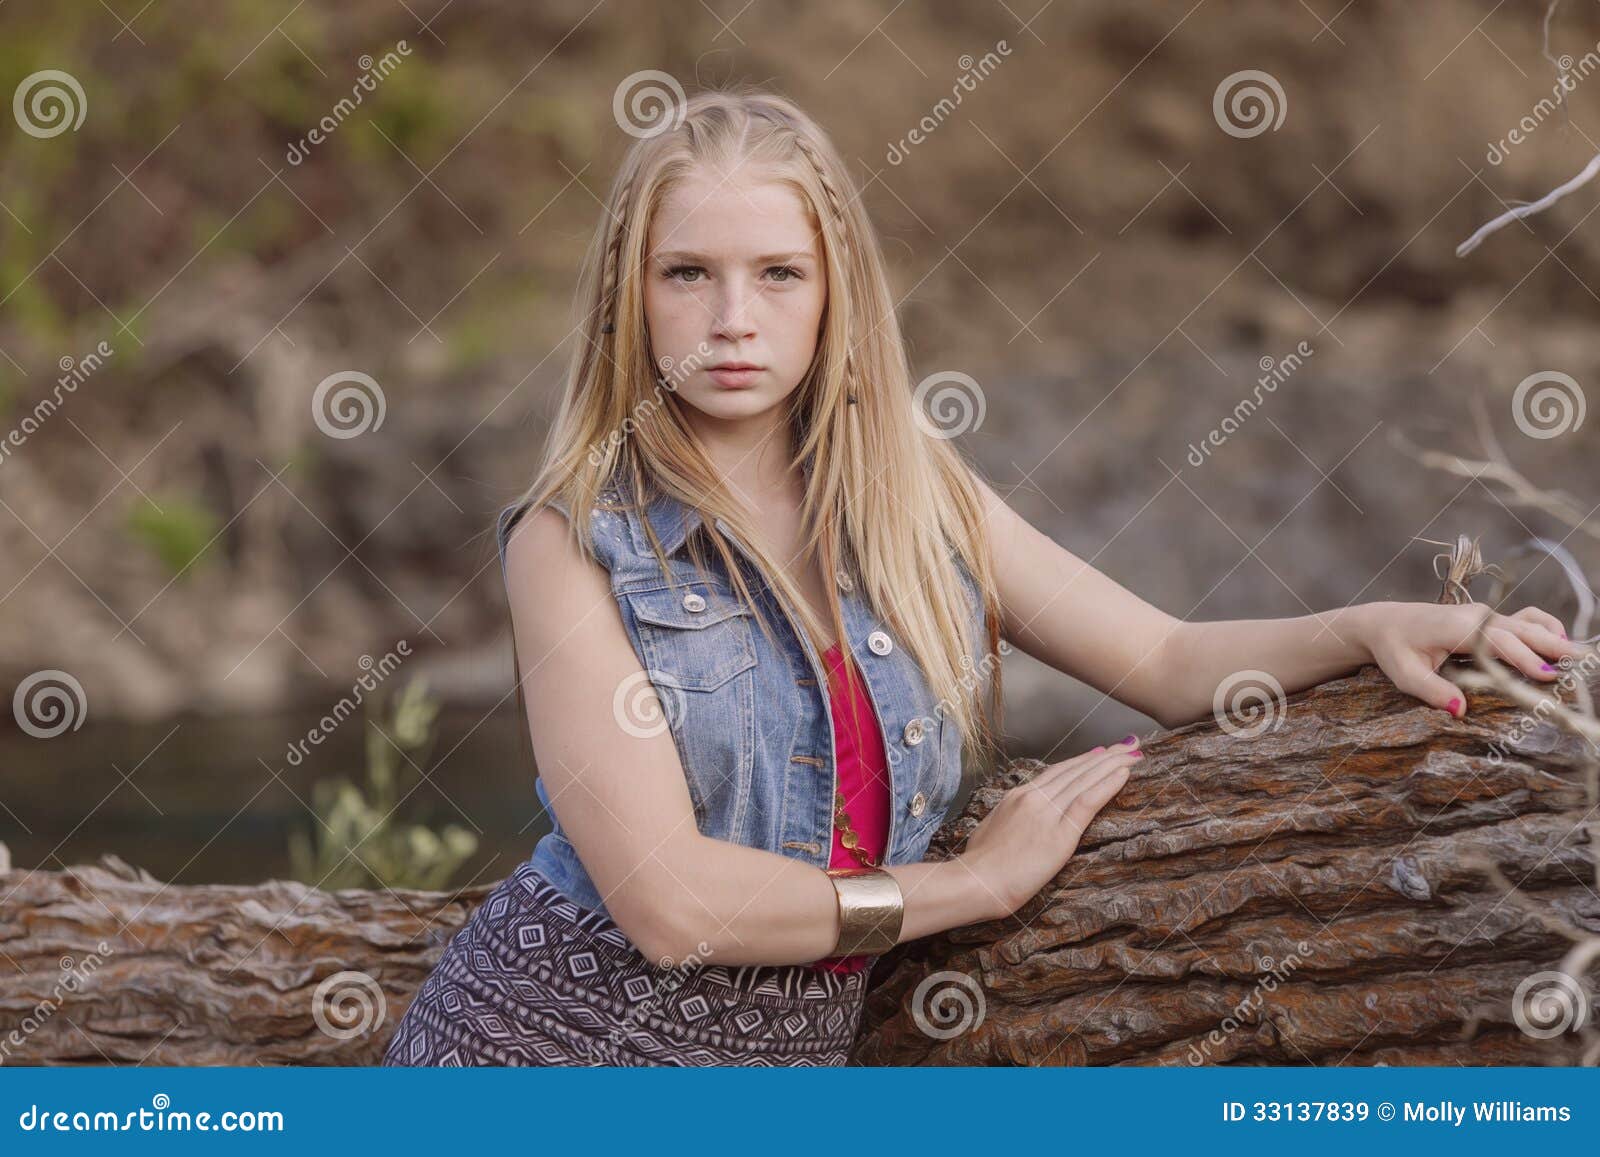 Teen Girl Royalty Free Stock Images Image 33137839